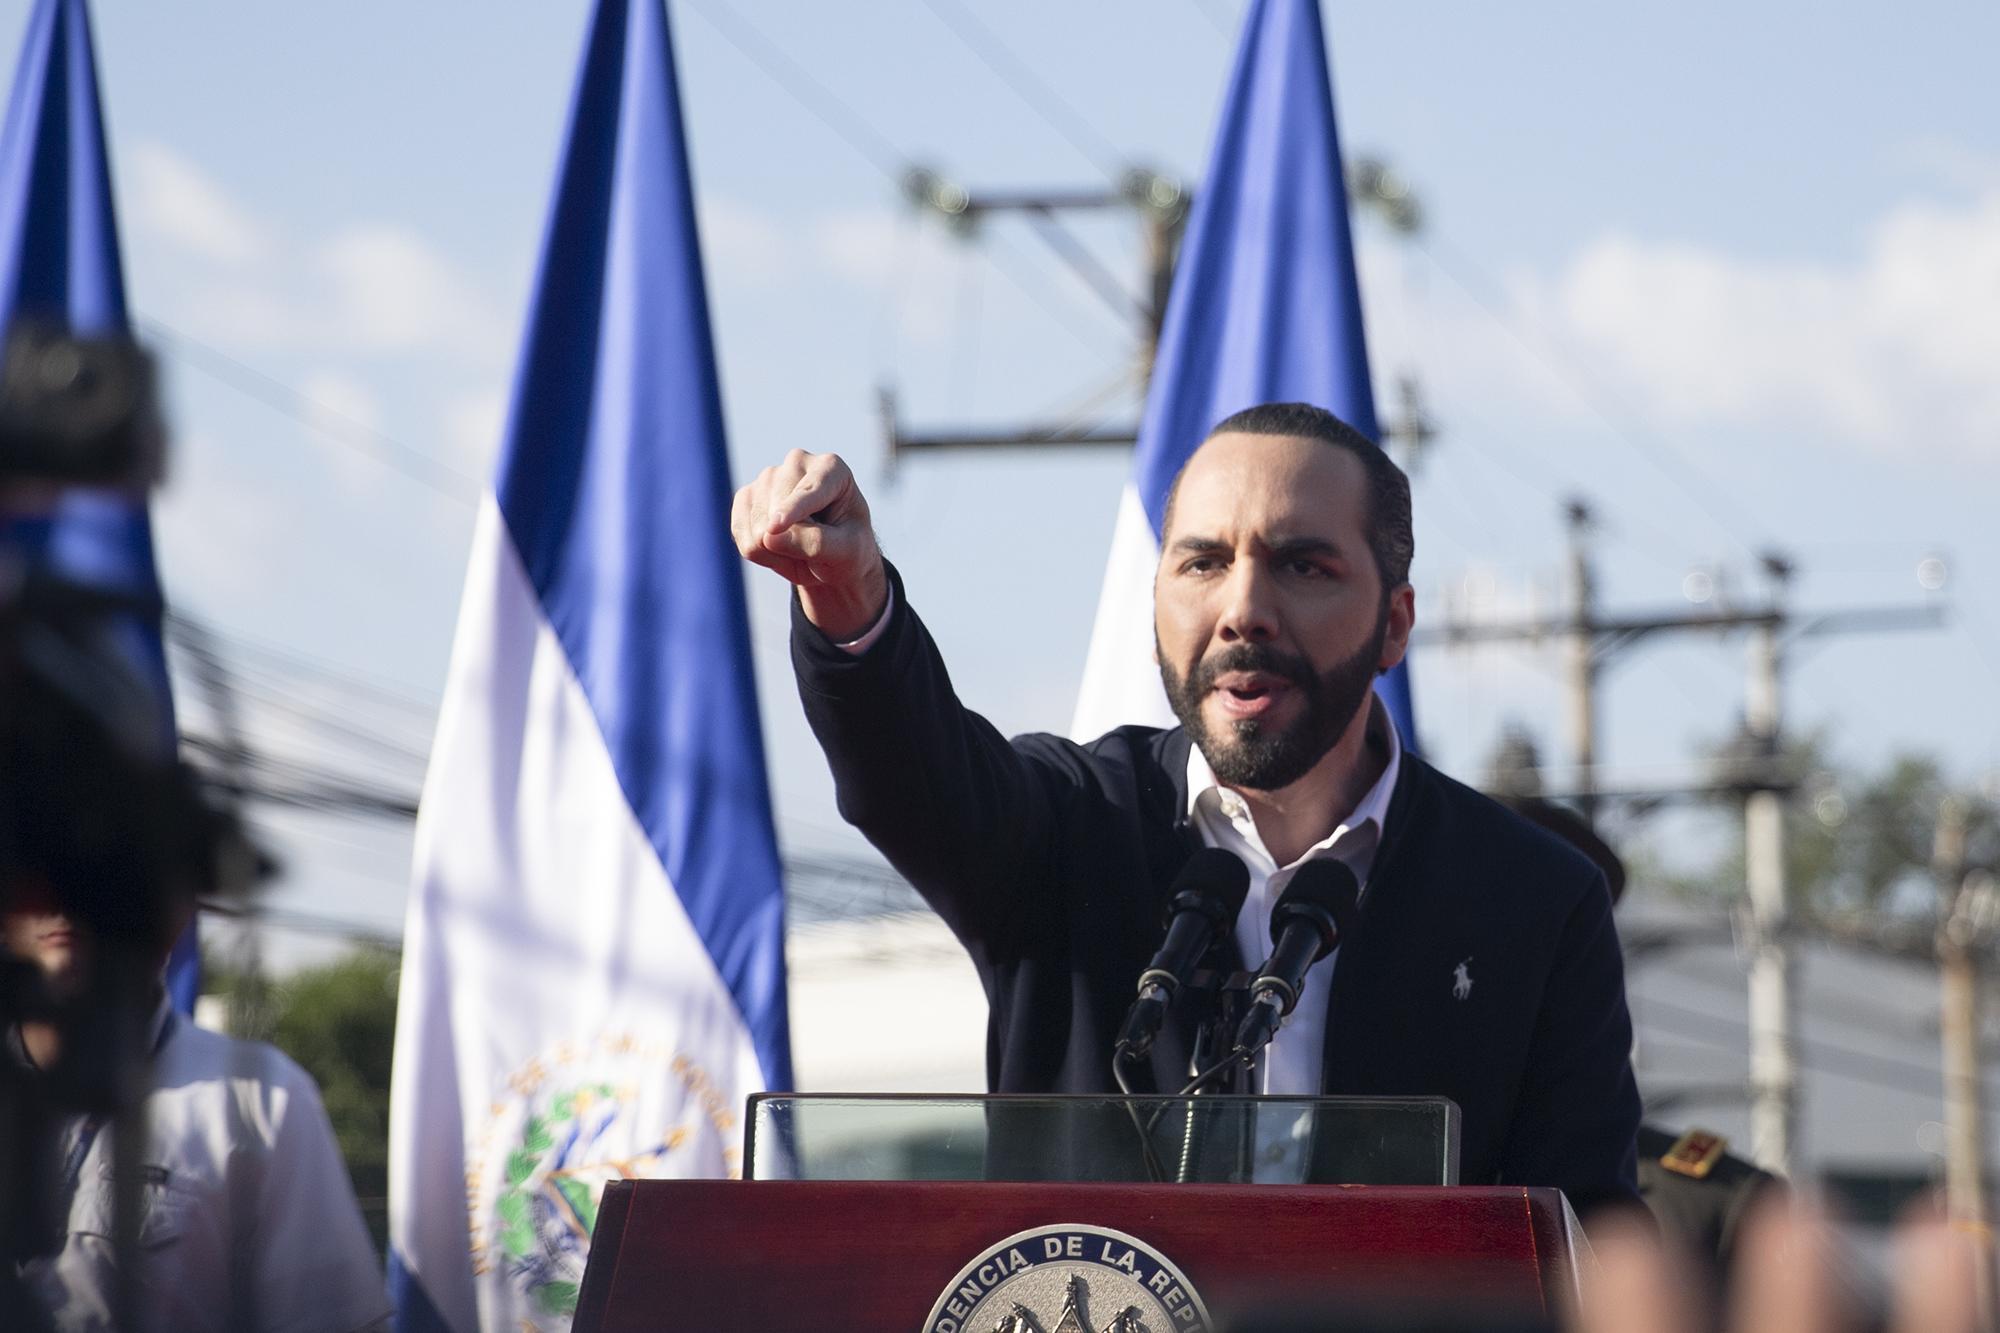 President Nayib Bukele gives a speech at the entrance to the Legislative Assembly, prior to the military occupation of the Assembly on February 9, 2020. Photo for El Faro: Carlos Barrera